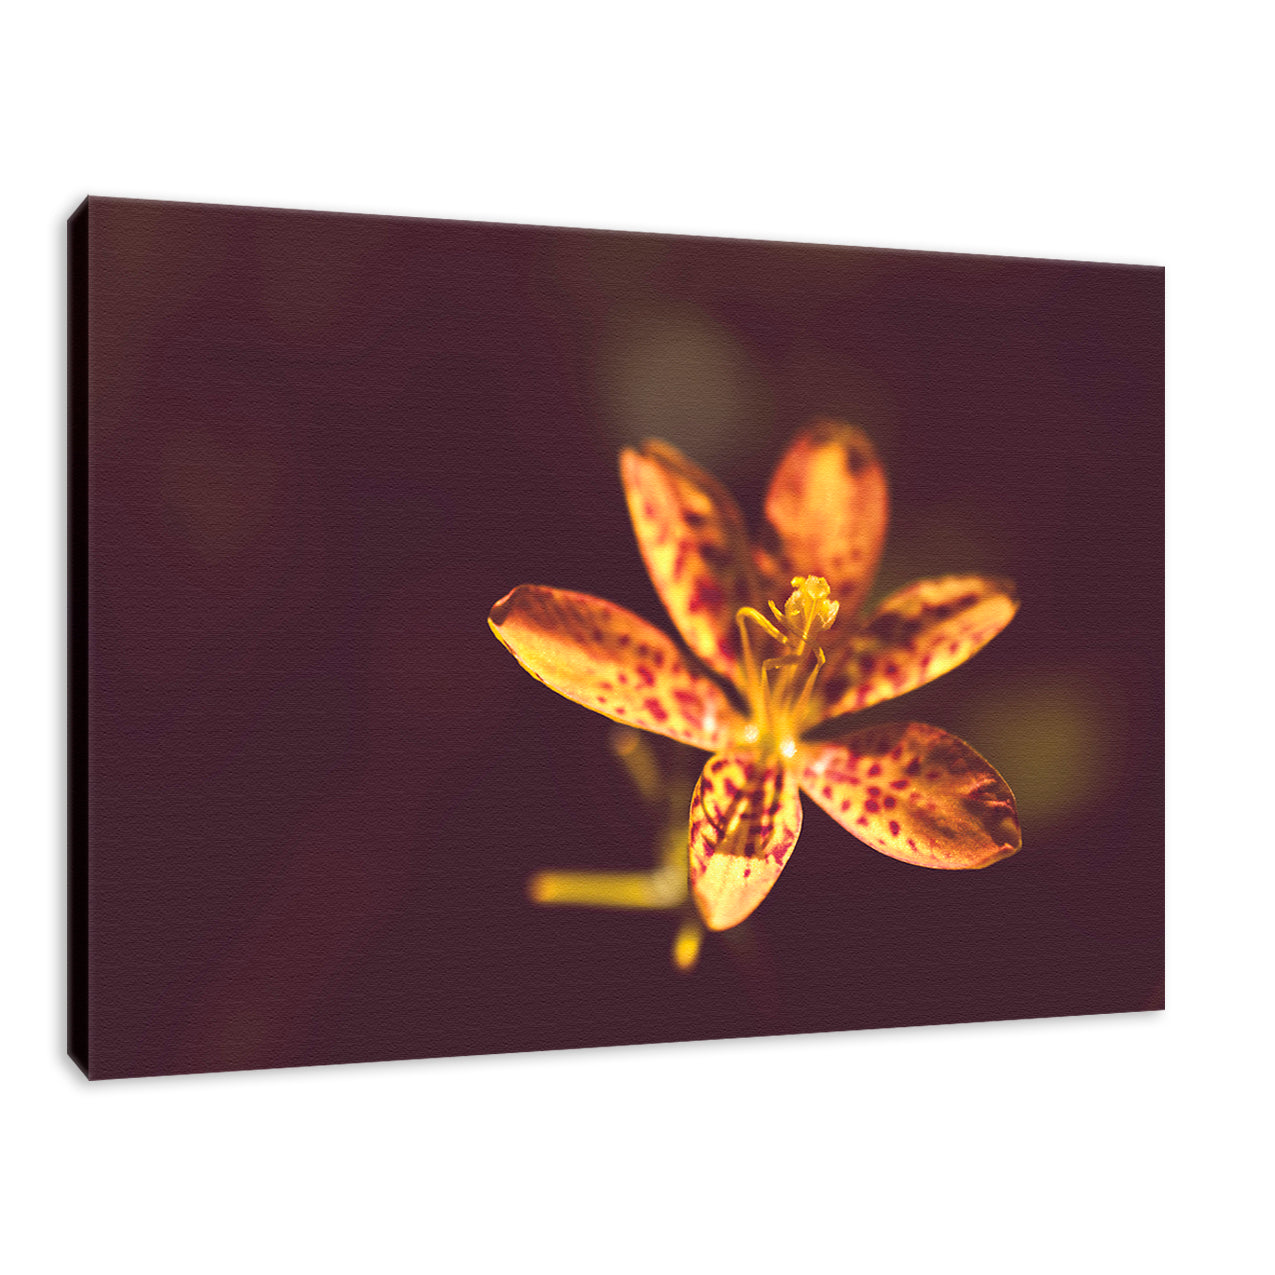 Dramatic Orange Leopard Lily Flower Nature / Floral Photo Fine Art Canvas Wall Art Prints  - PIPAFINEART